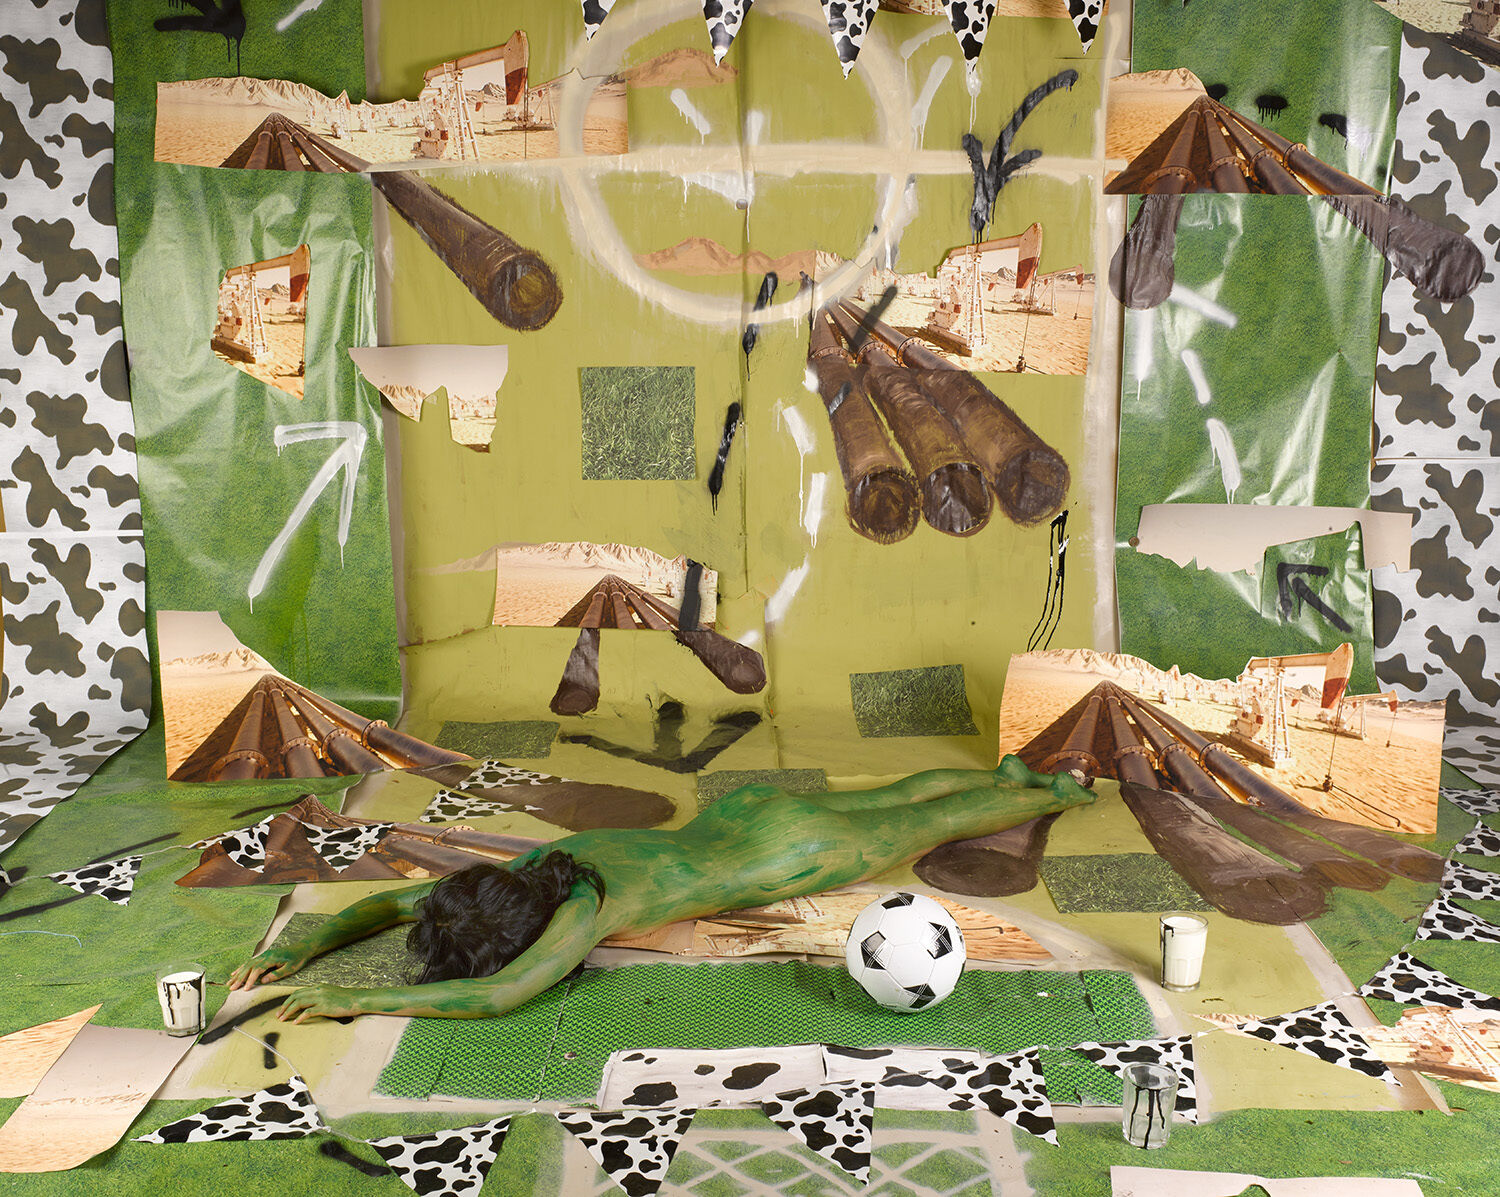 A person painted in green lays face down against a collaged background.